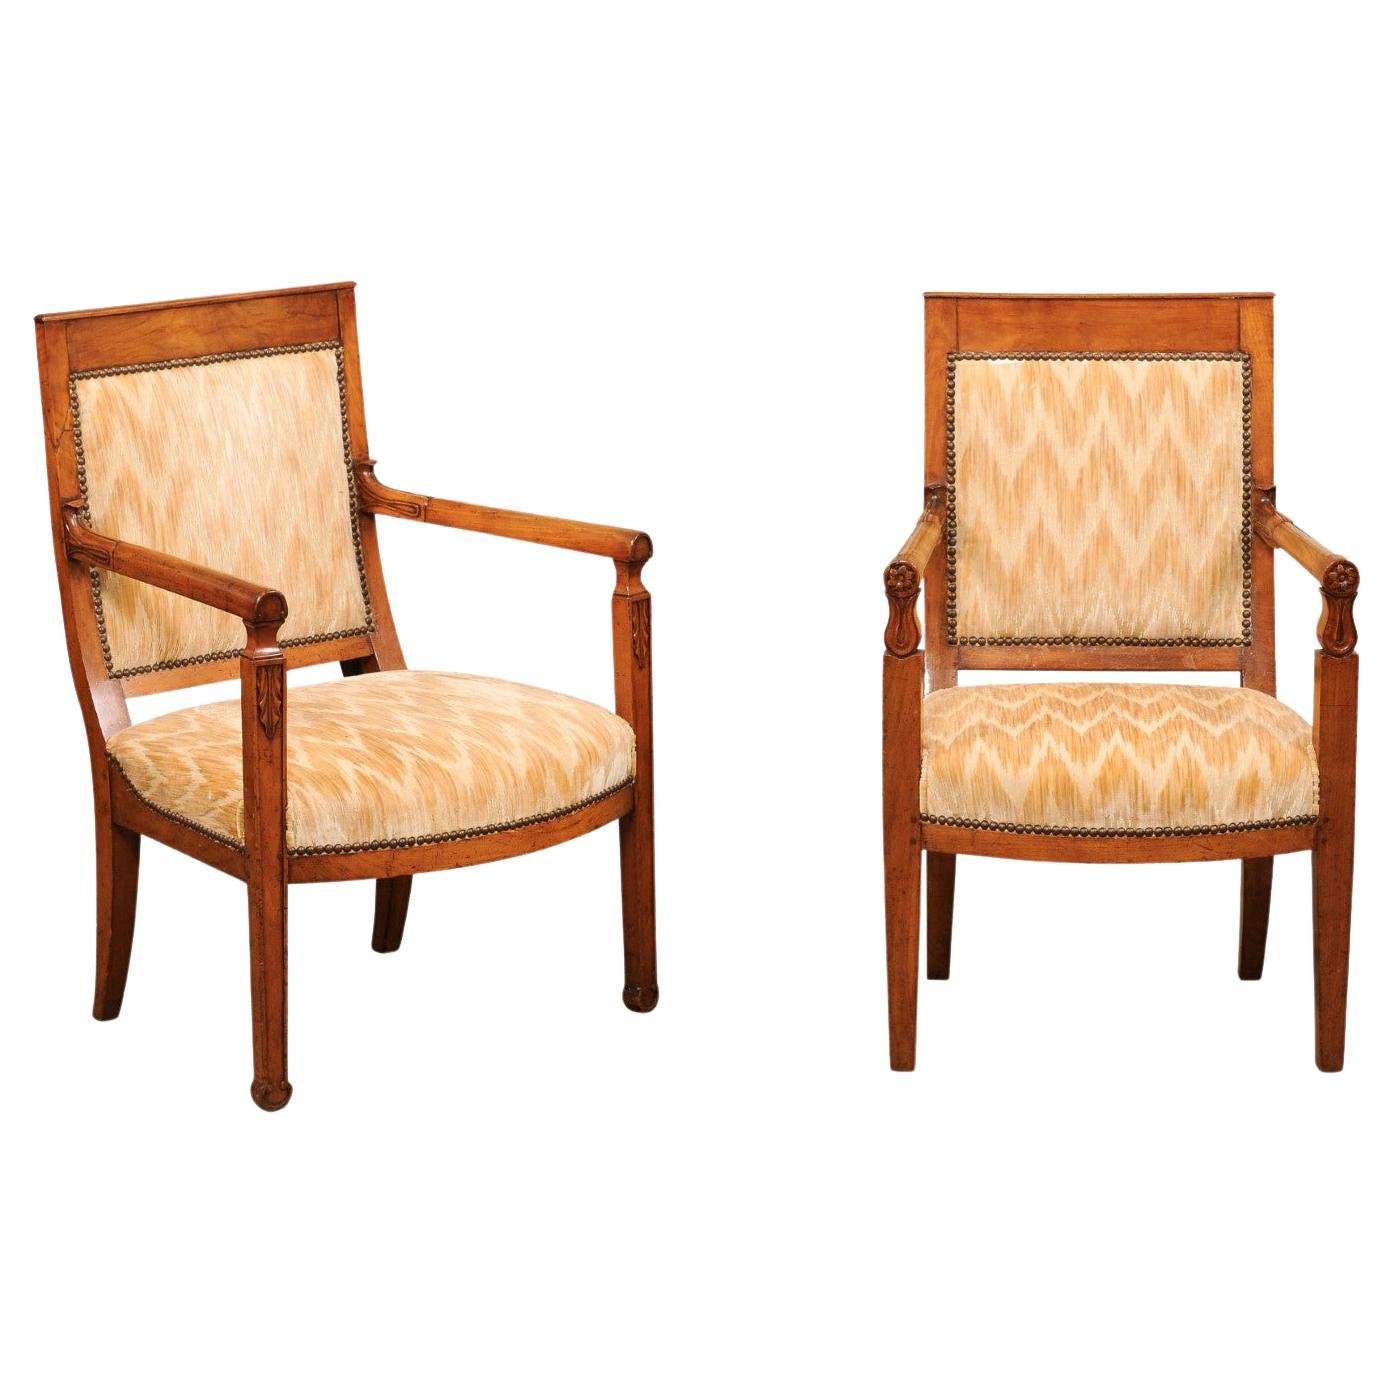 Matched Pair of Neoclassical Style Walnut Armchairs, 20th Century France